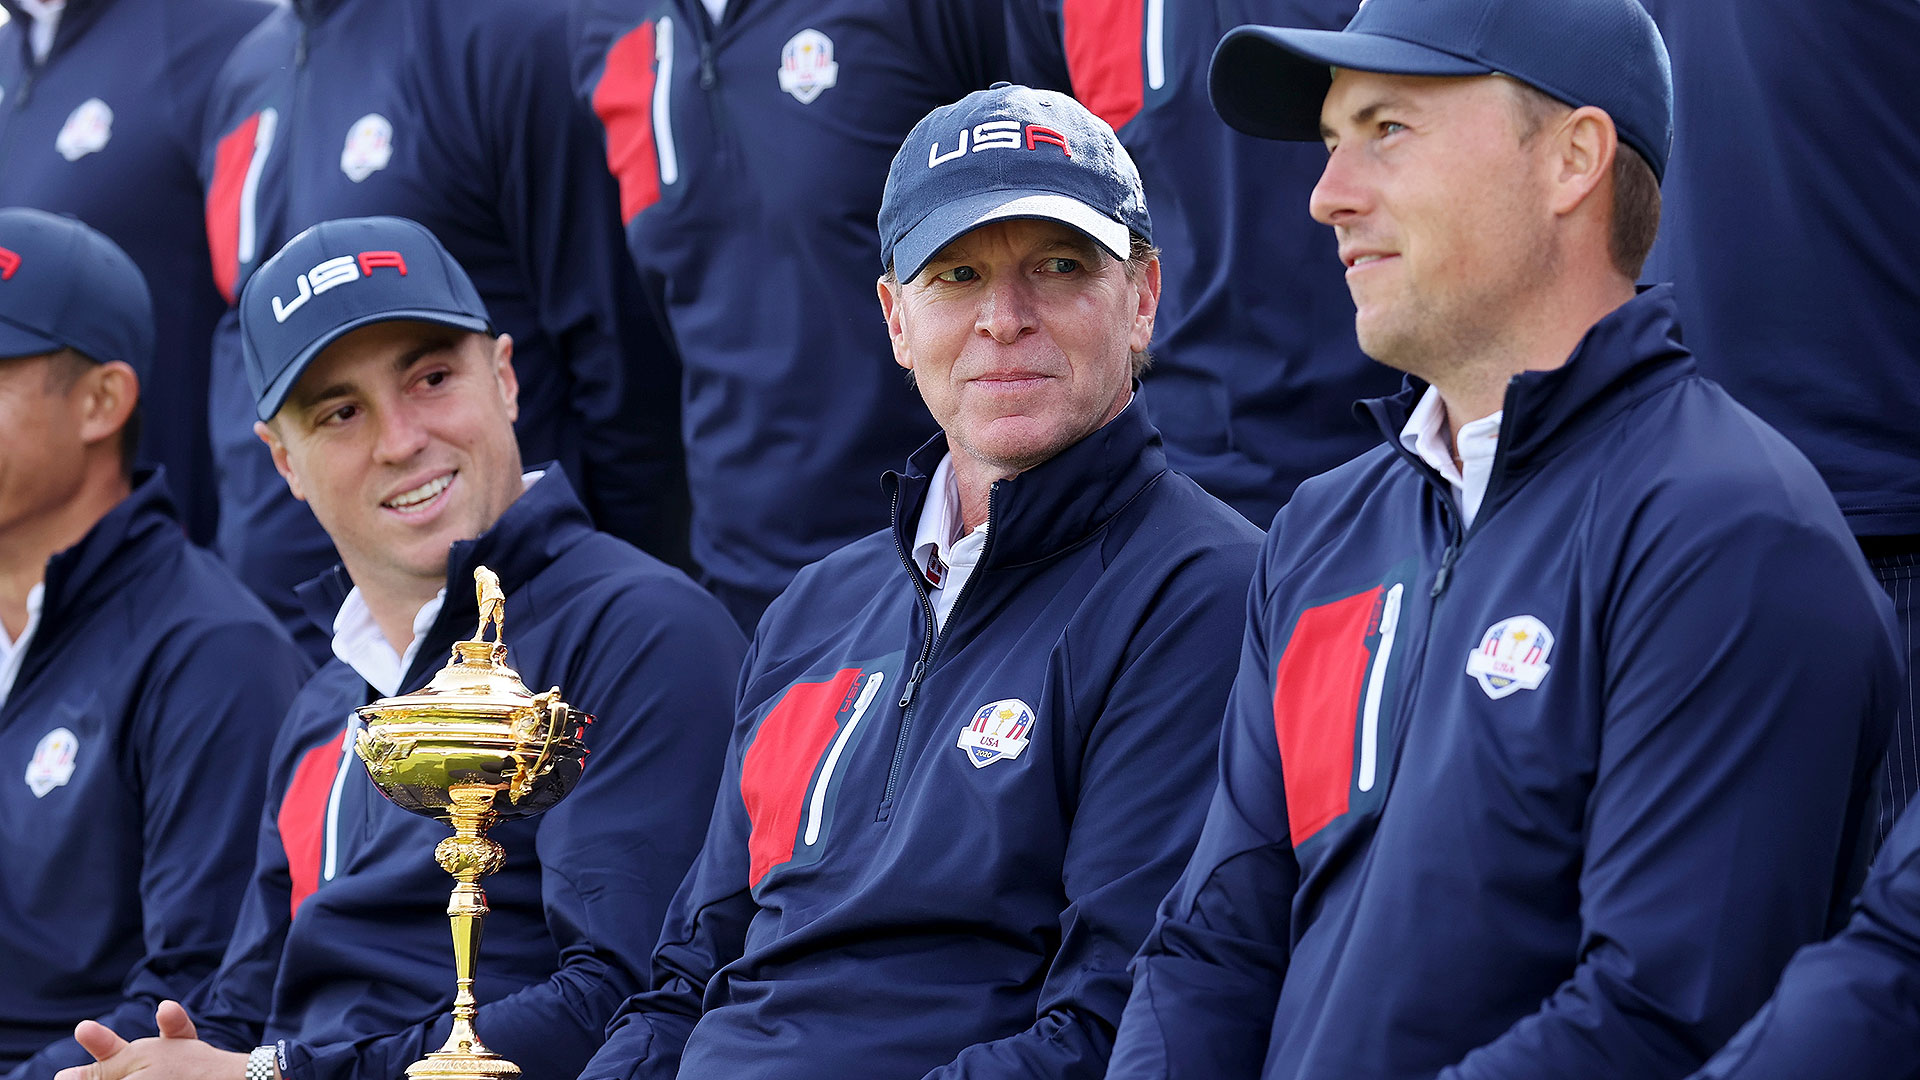 Punch Shot: Man of the Match, top pairing and who wins the 2020 Ryder Cup?